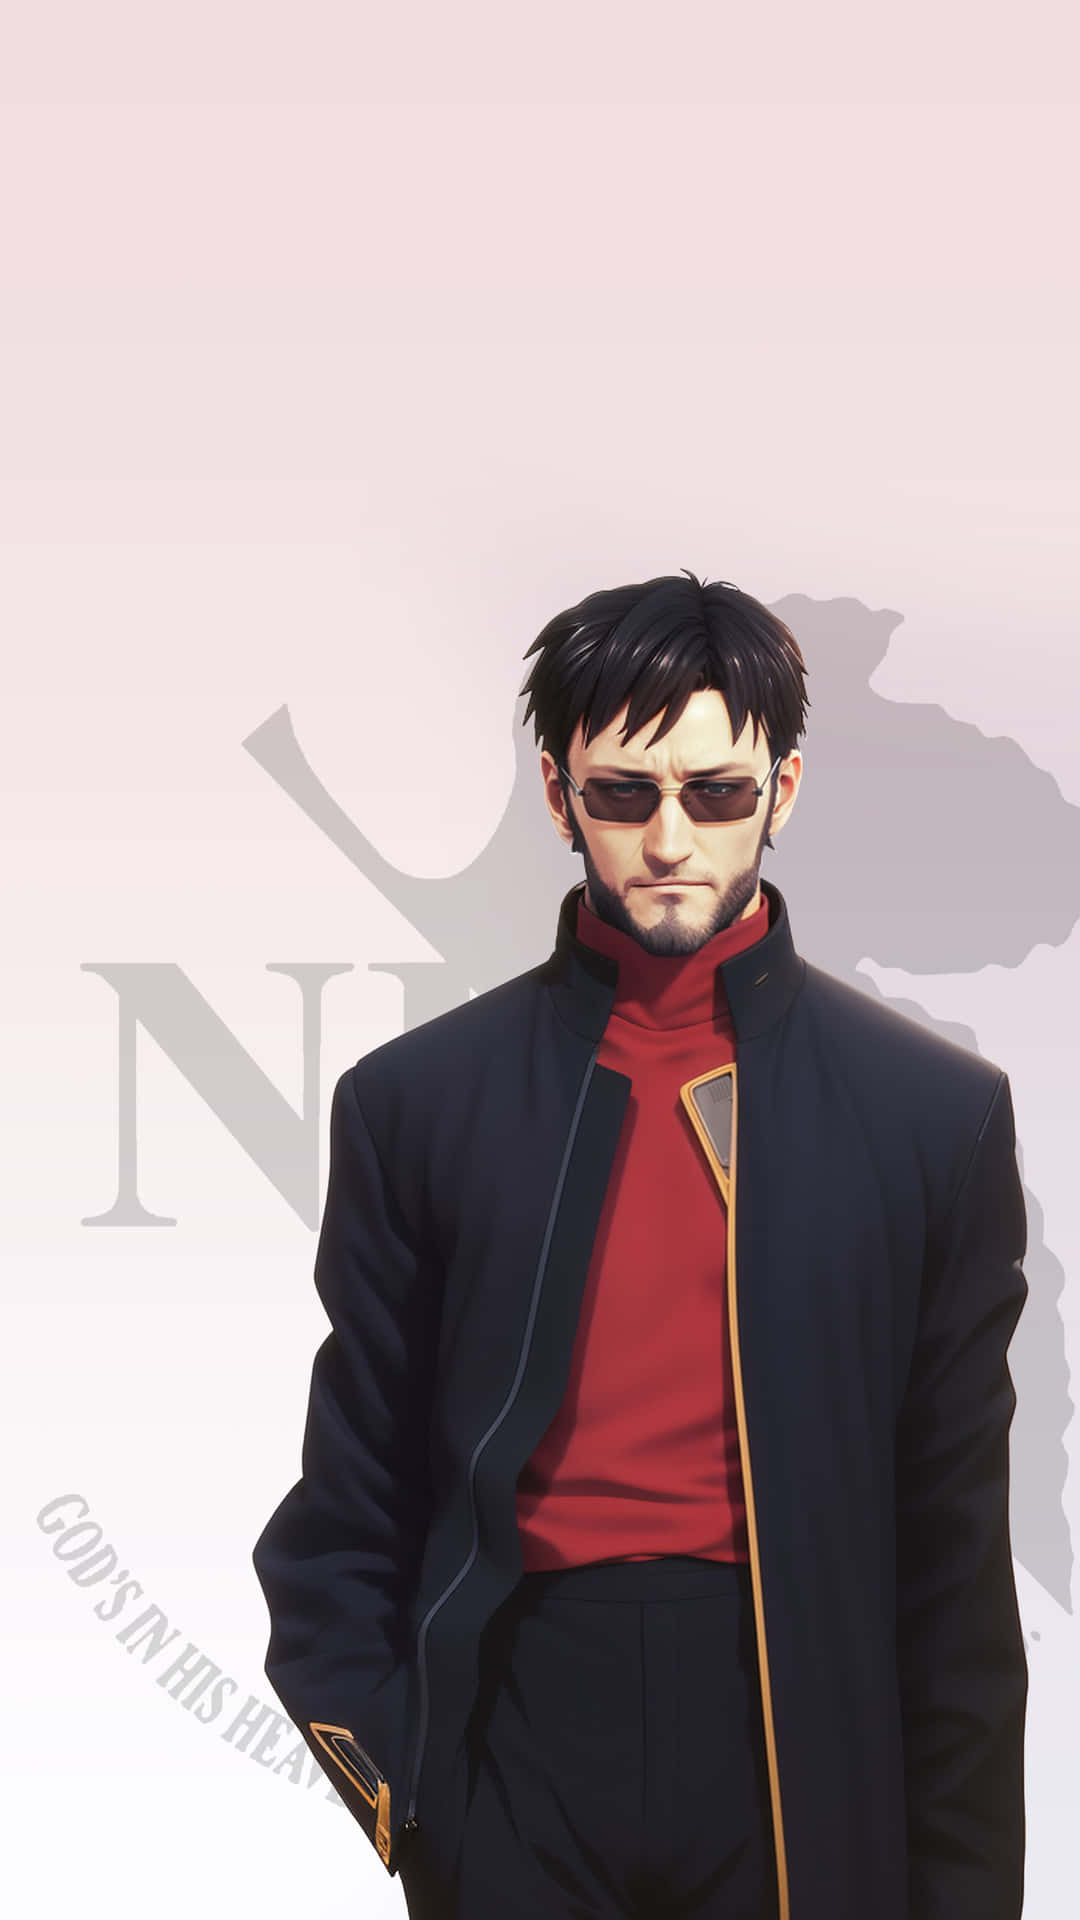 Gendo Ikari strikes a pose in his iconic office Wallpaper